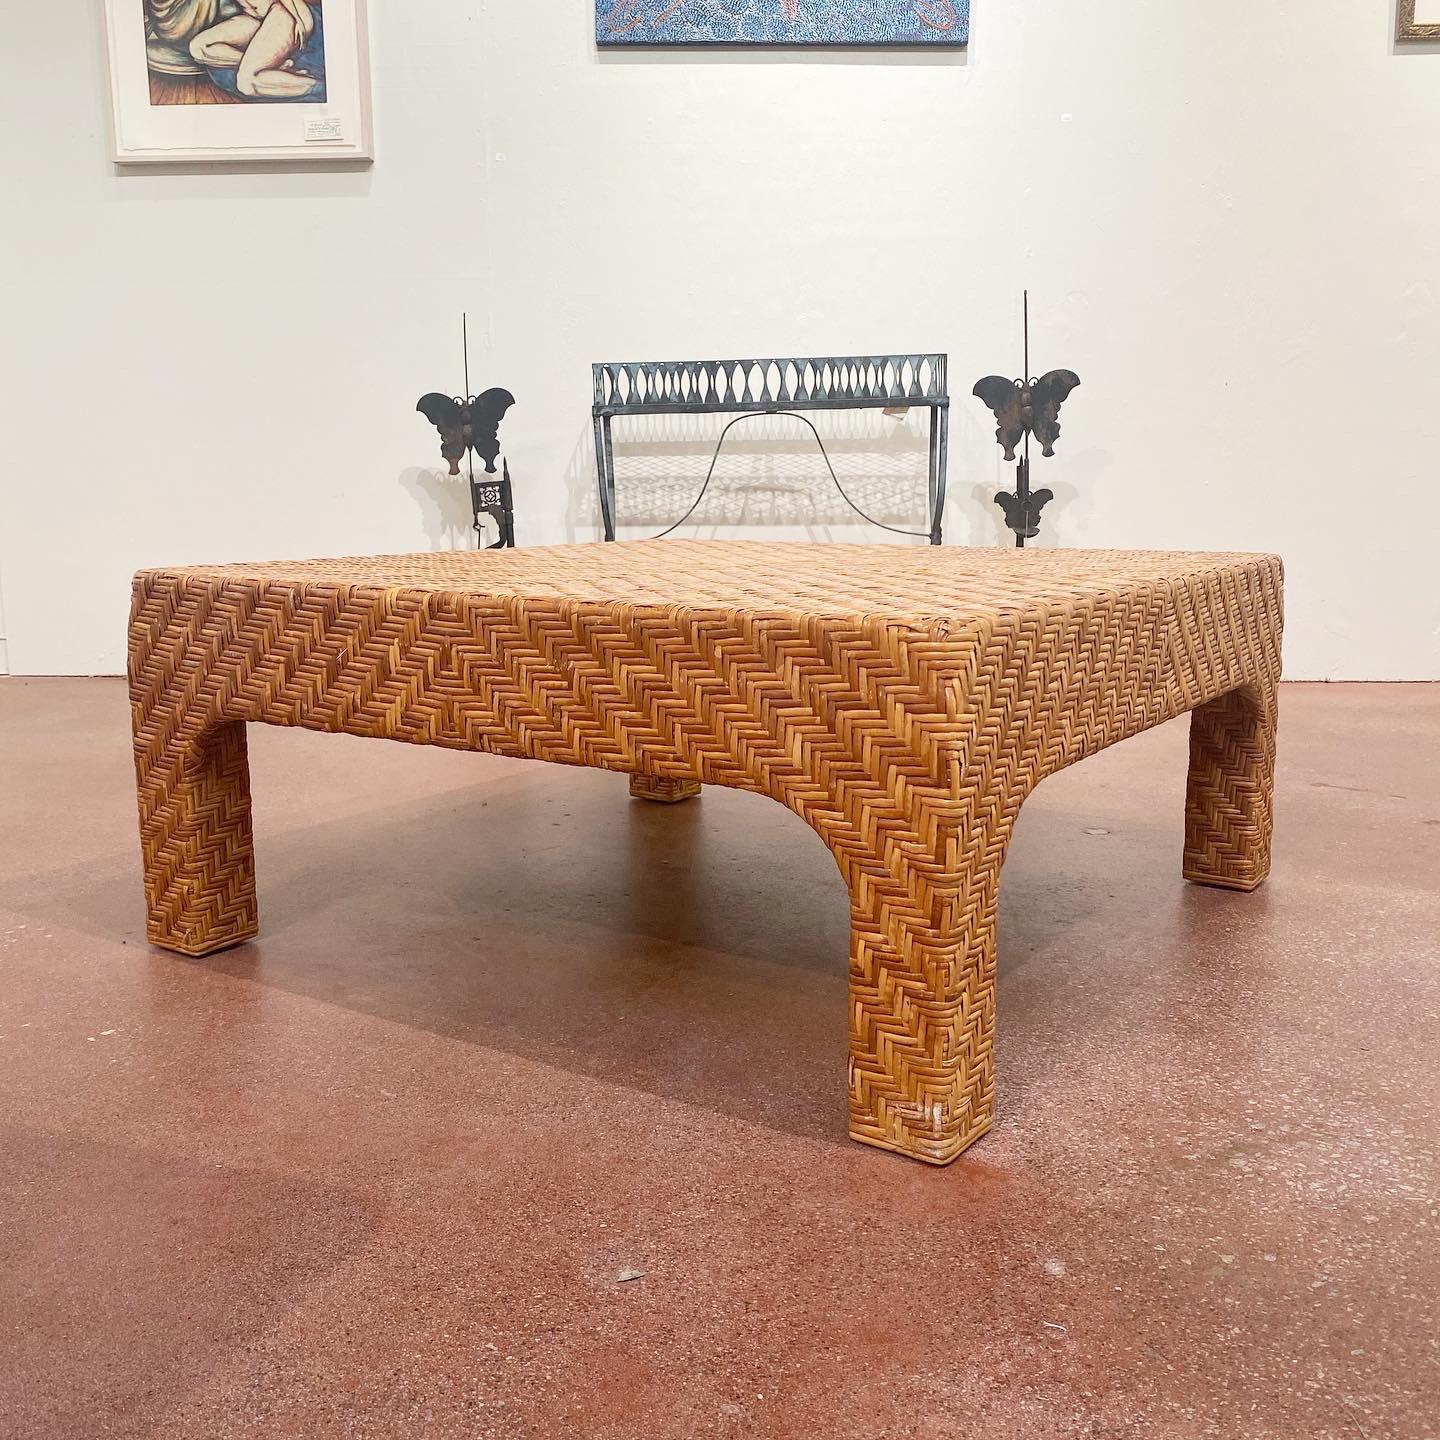 Vintage modern woven rattan coffee table. Completely enveloped in woven rattan and in excellent vintage condition.